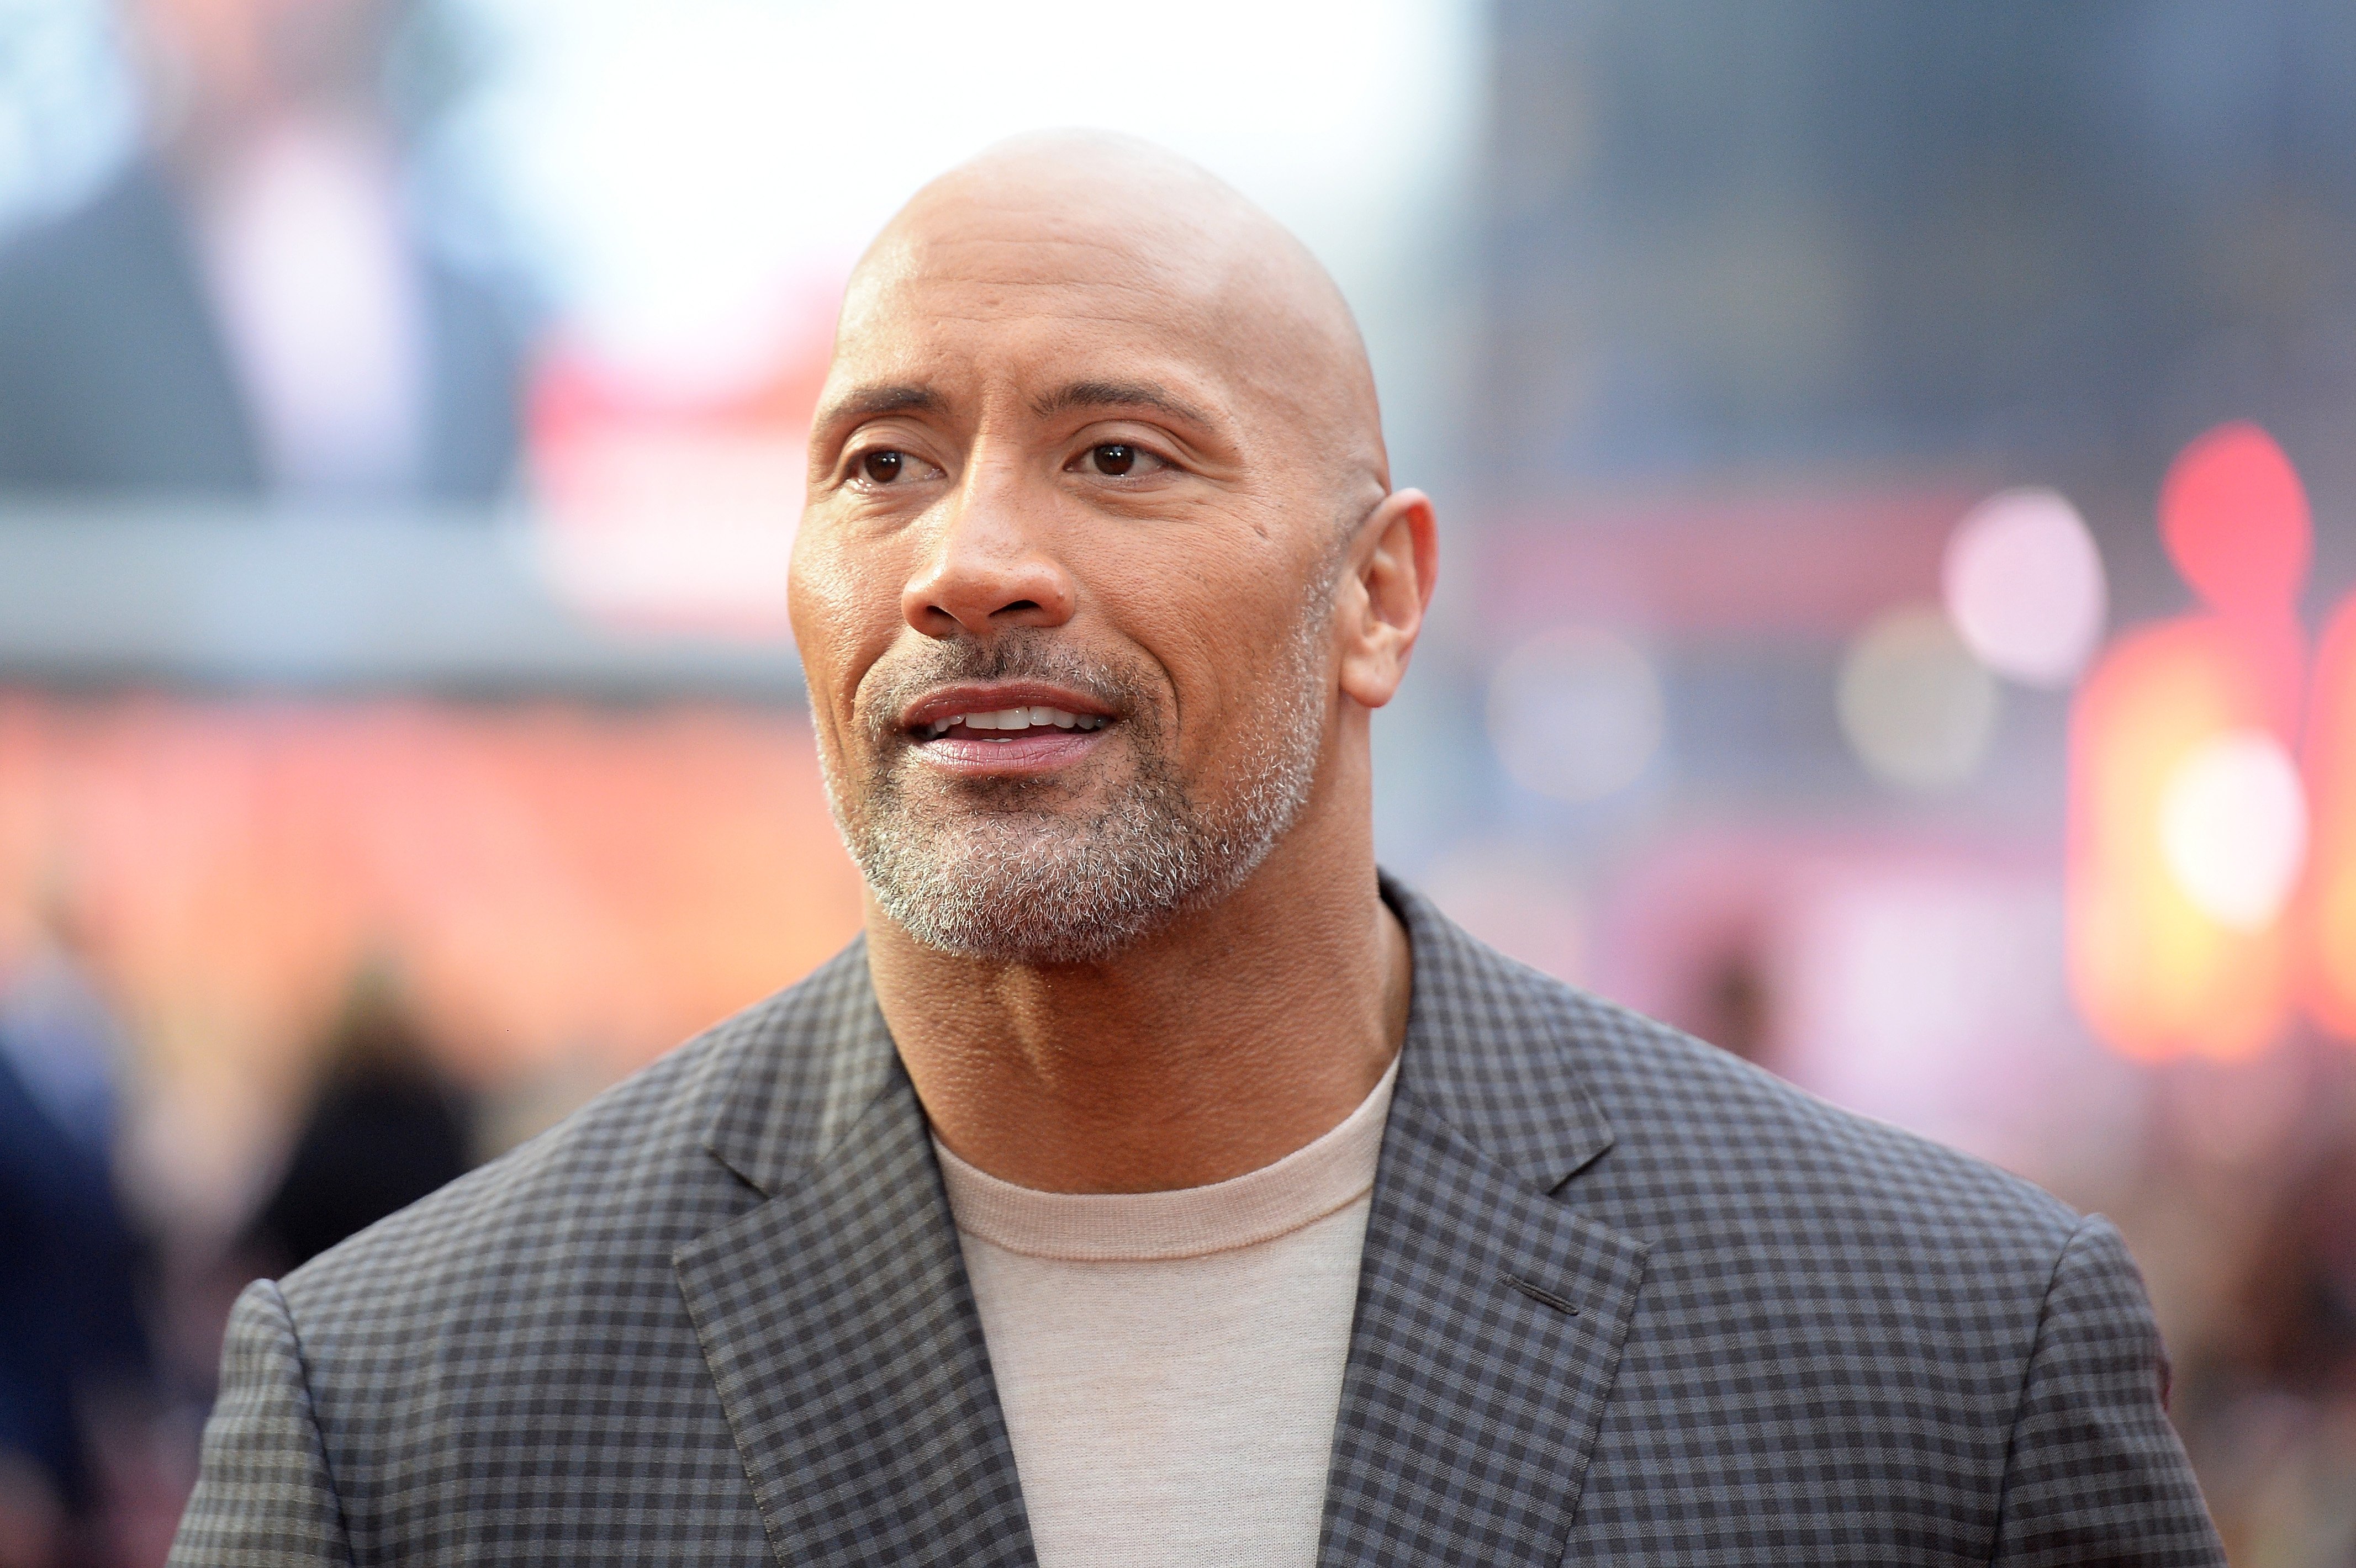 Dwayne Johnson attending the premiere of 'Rampage' in England. | Photo: Getty Images